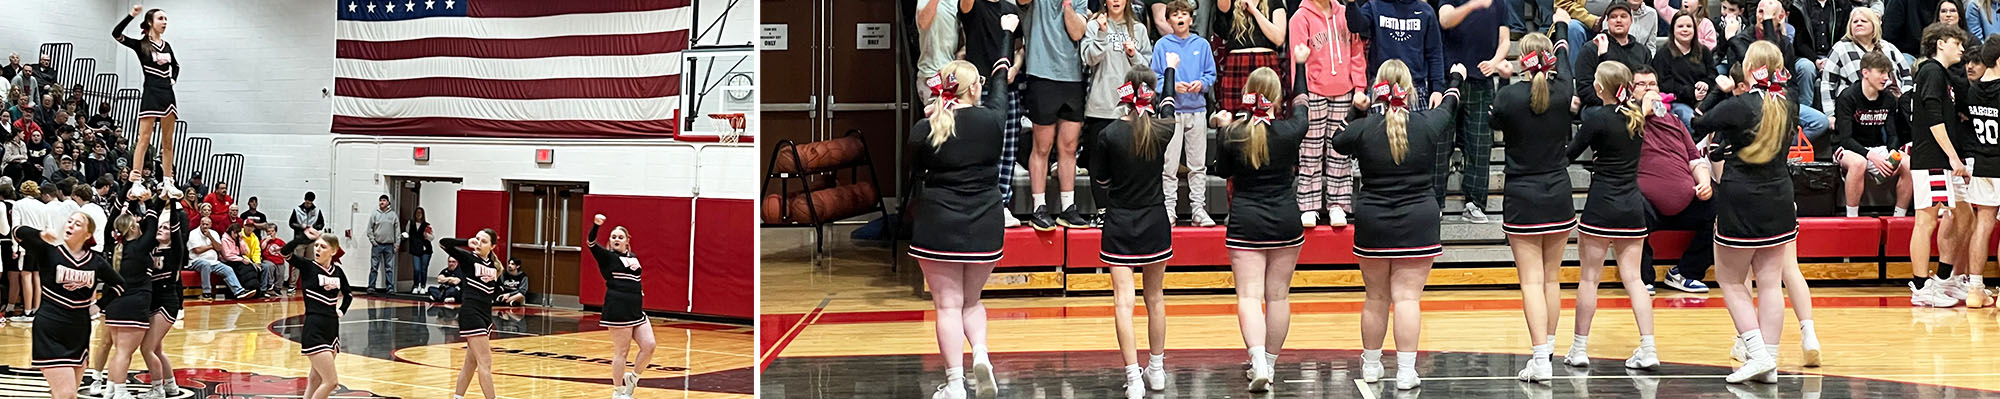 Cheer team performing in front of an audience in the gym